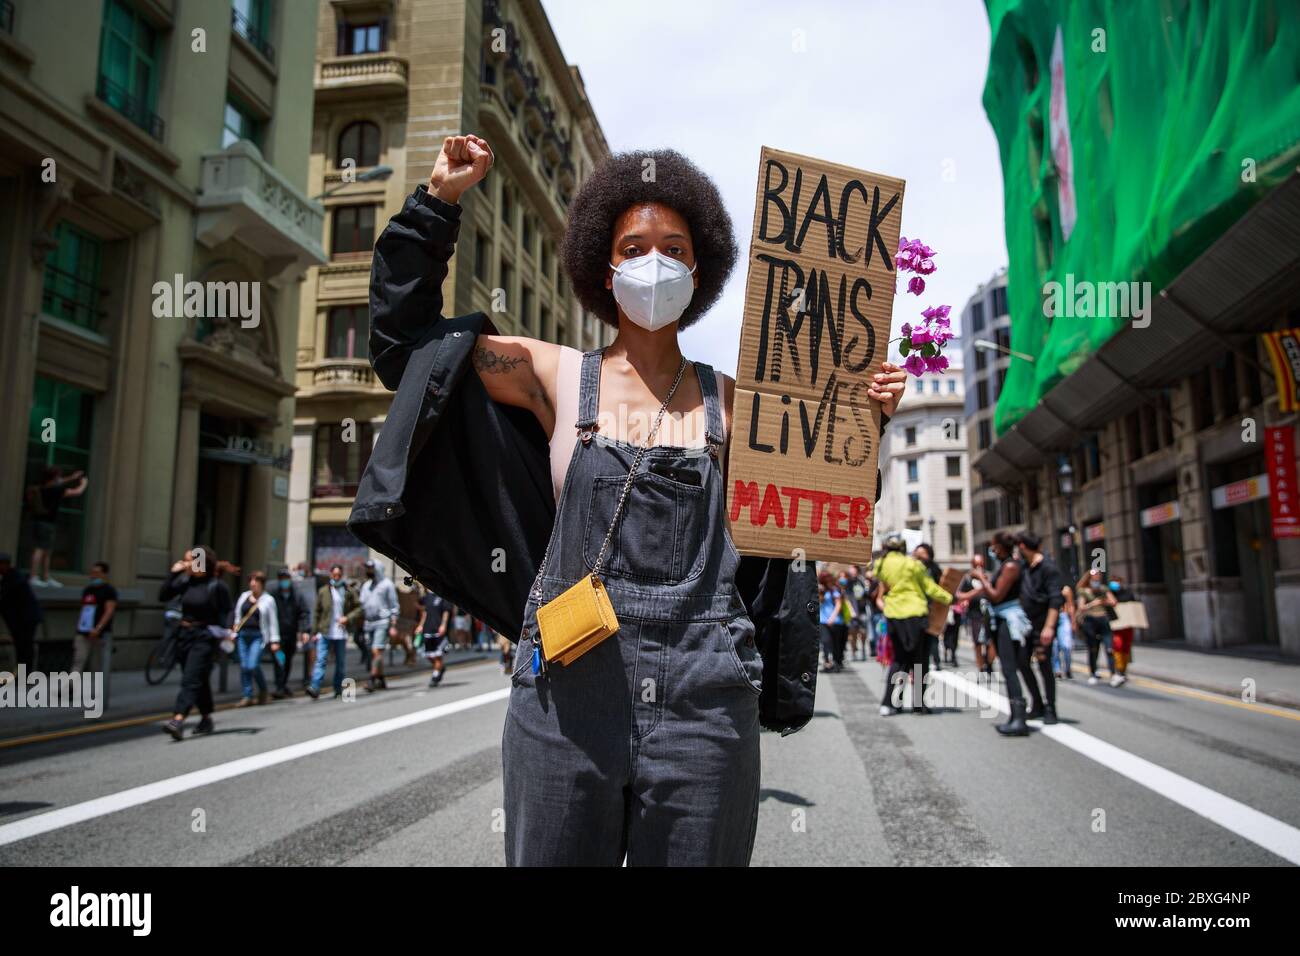 Barcelona, Spain. 07th June, 2020. BARCELONA, SPAIN-June 7, 2020. A protester holds a sign reading 'Black Trans Lives Matter' during an anti-racism rally outside the Catalan Parliament. The demonstration was organized by the Black African and Afrodescendant Community in Spain (CNAAE) in response to the police killing of George Floyd in the United States. Credit: Christine Tyler/Alamy Live News Stock Photo